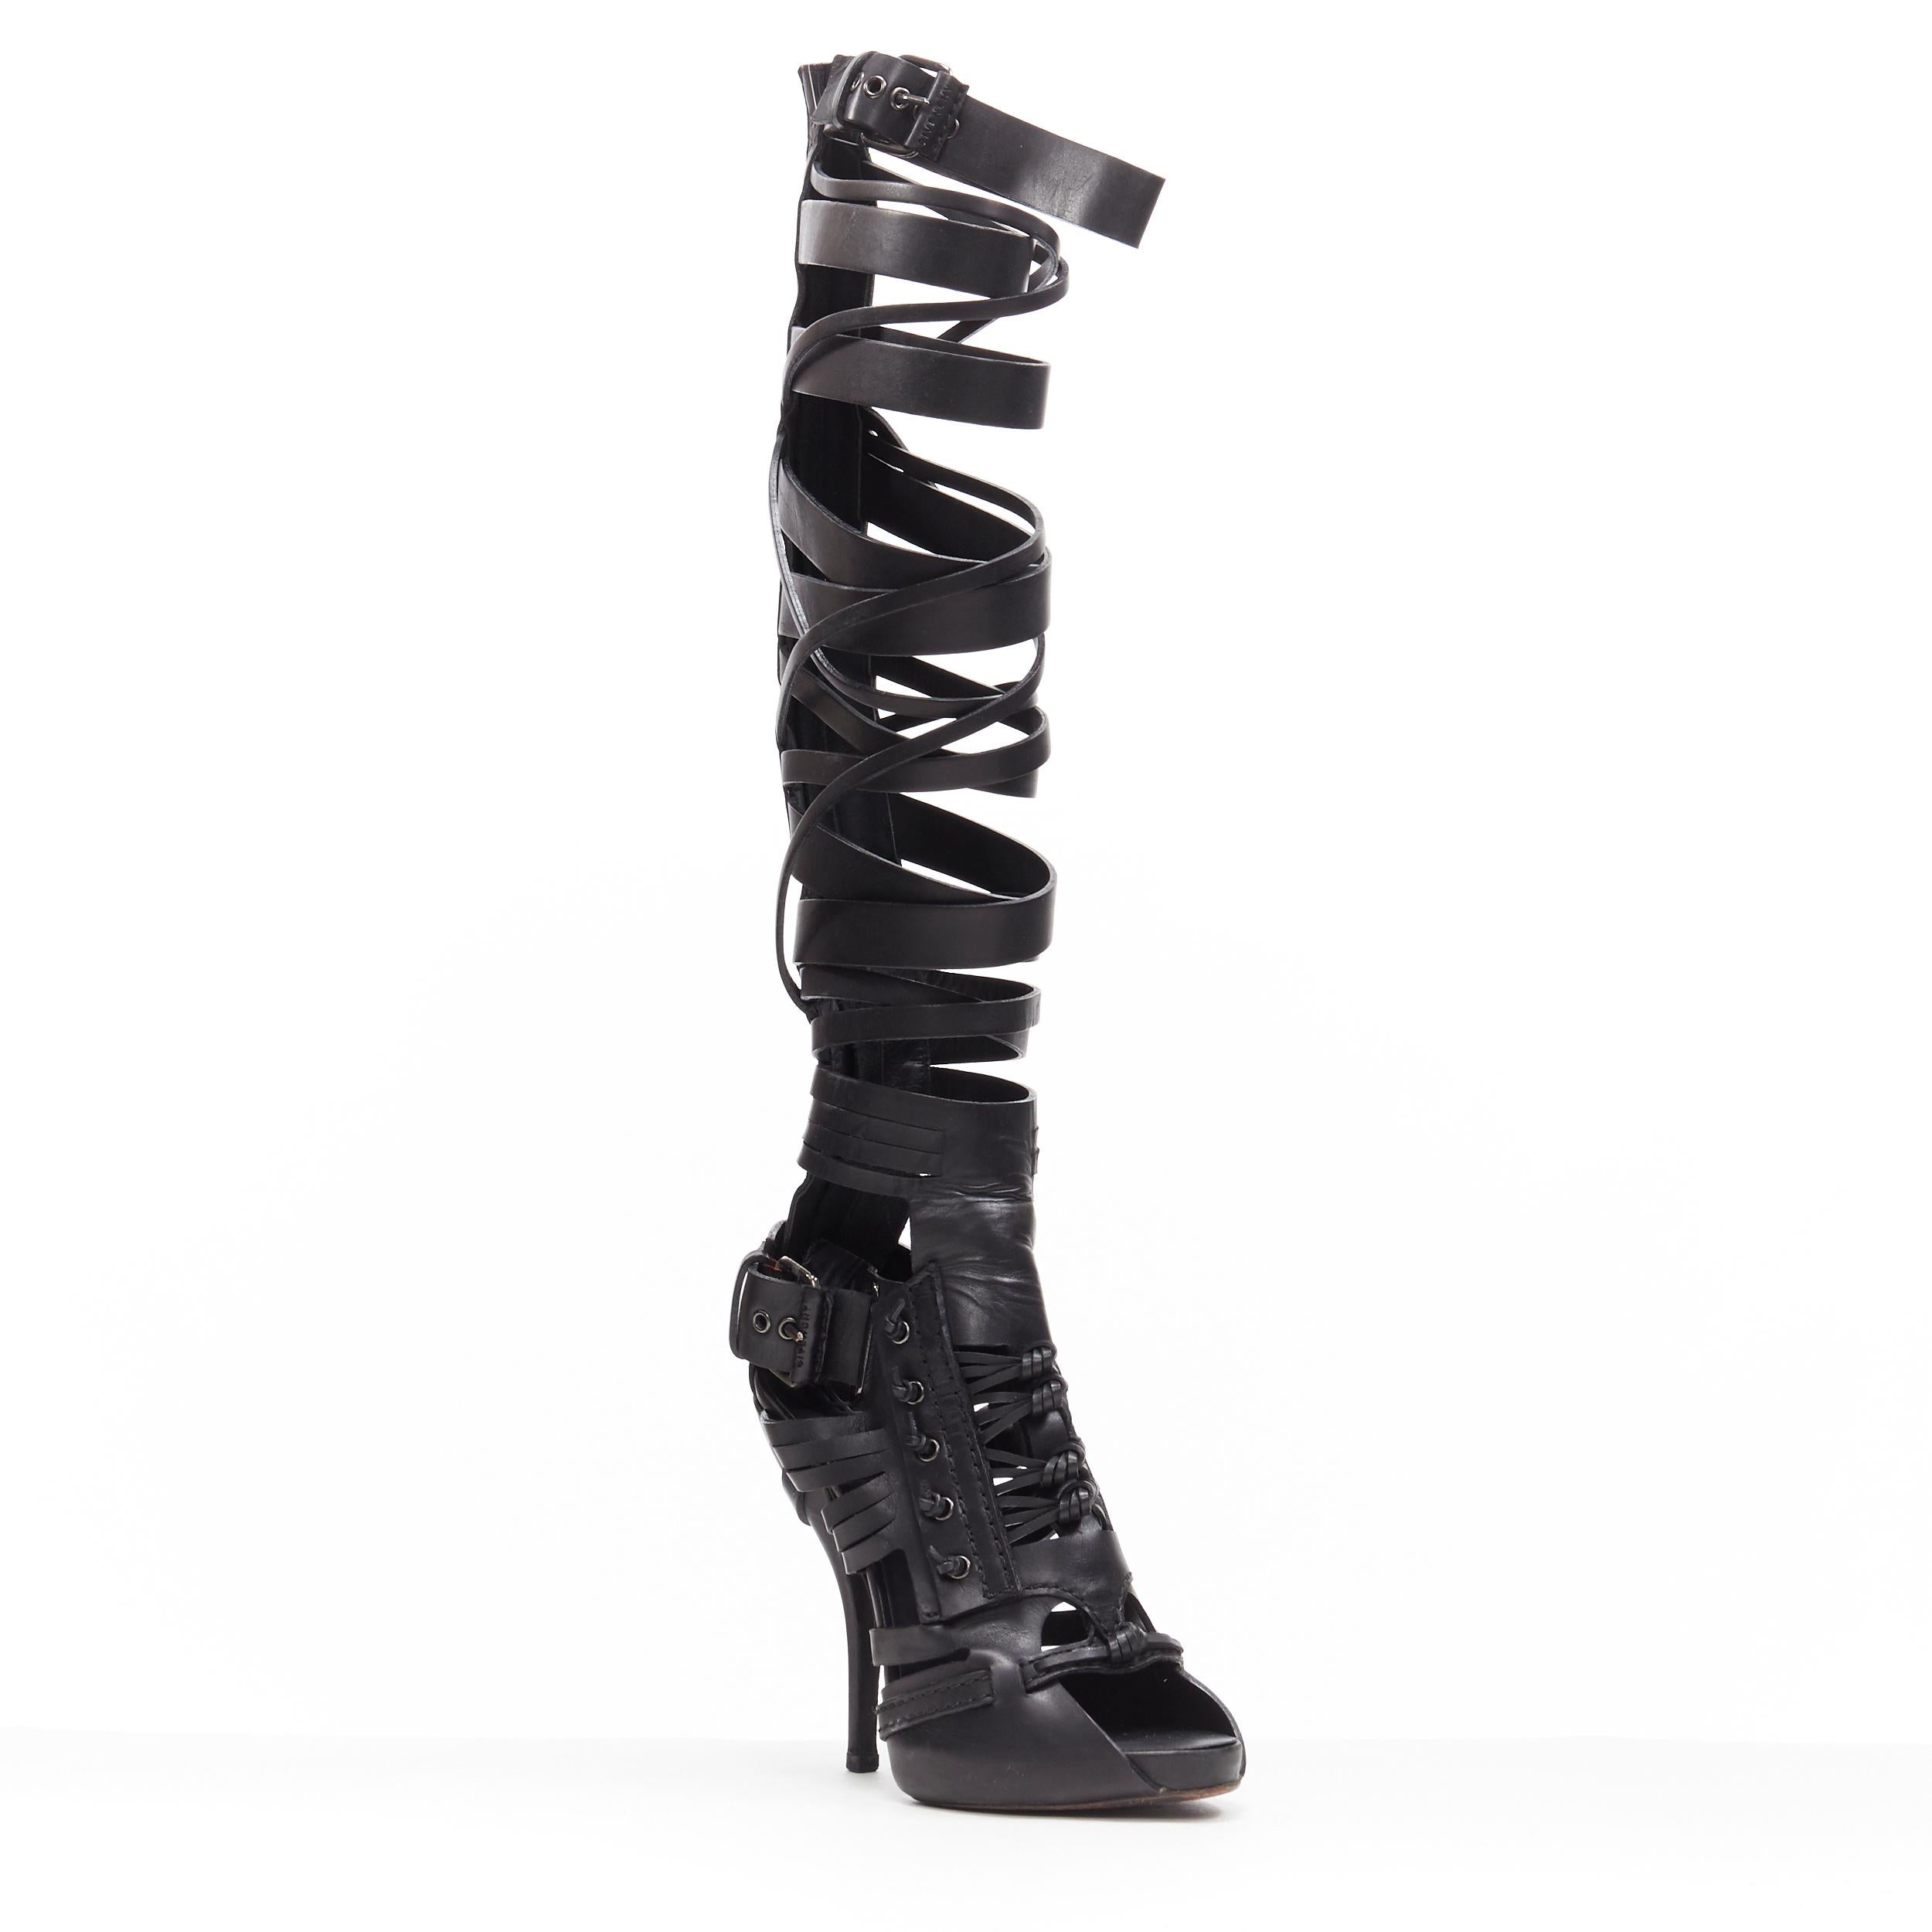 runway GIVENCHY TISCI black leather strappy peep warrior gladiator sandals EU37
Brand: Givenchy
Designer: Riccardo Tisci
Model Name / Style: Gladiator sandals
Material: Leather
Color: Black
Pattern: Solid
Closure: Zip
Extra Detail: Ultra High (4 in